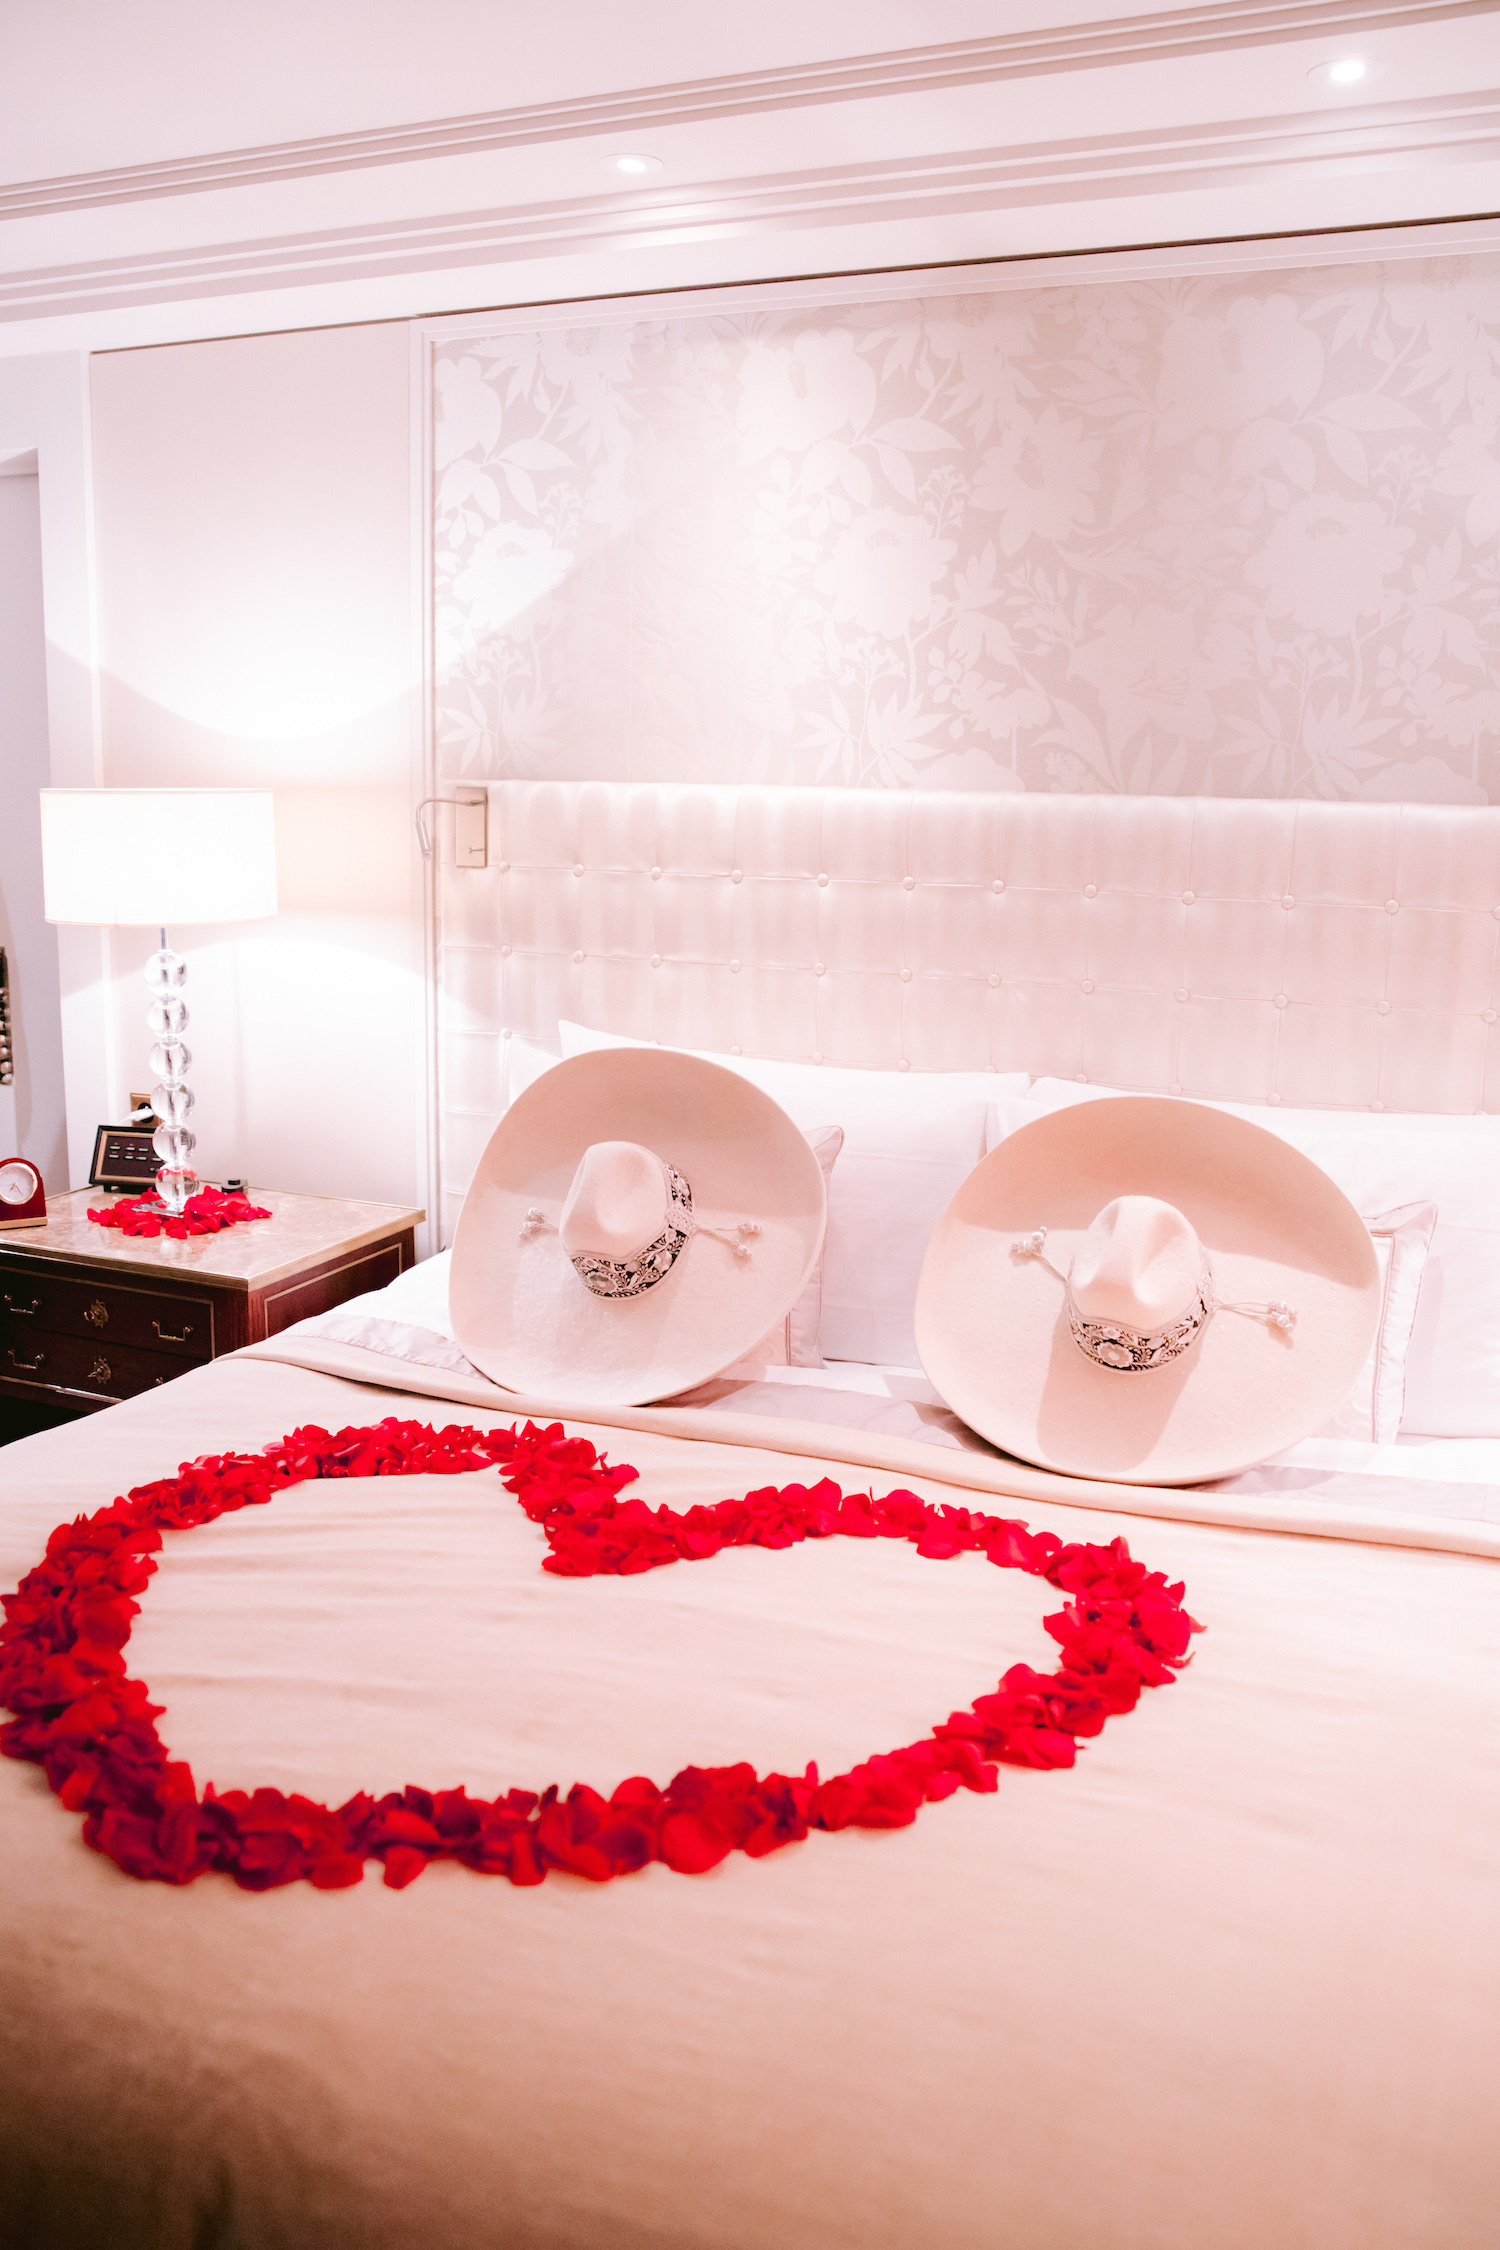 bed with sombreros and red rose petals